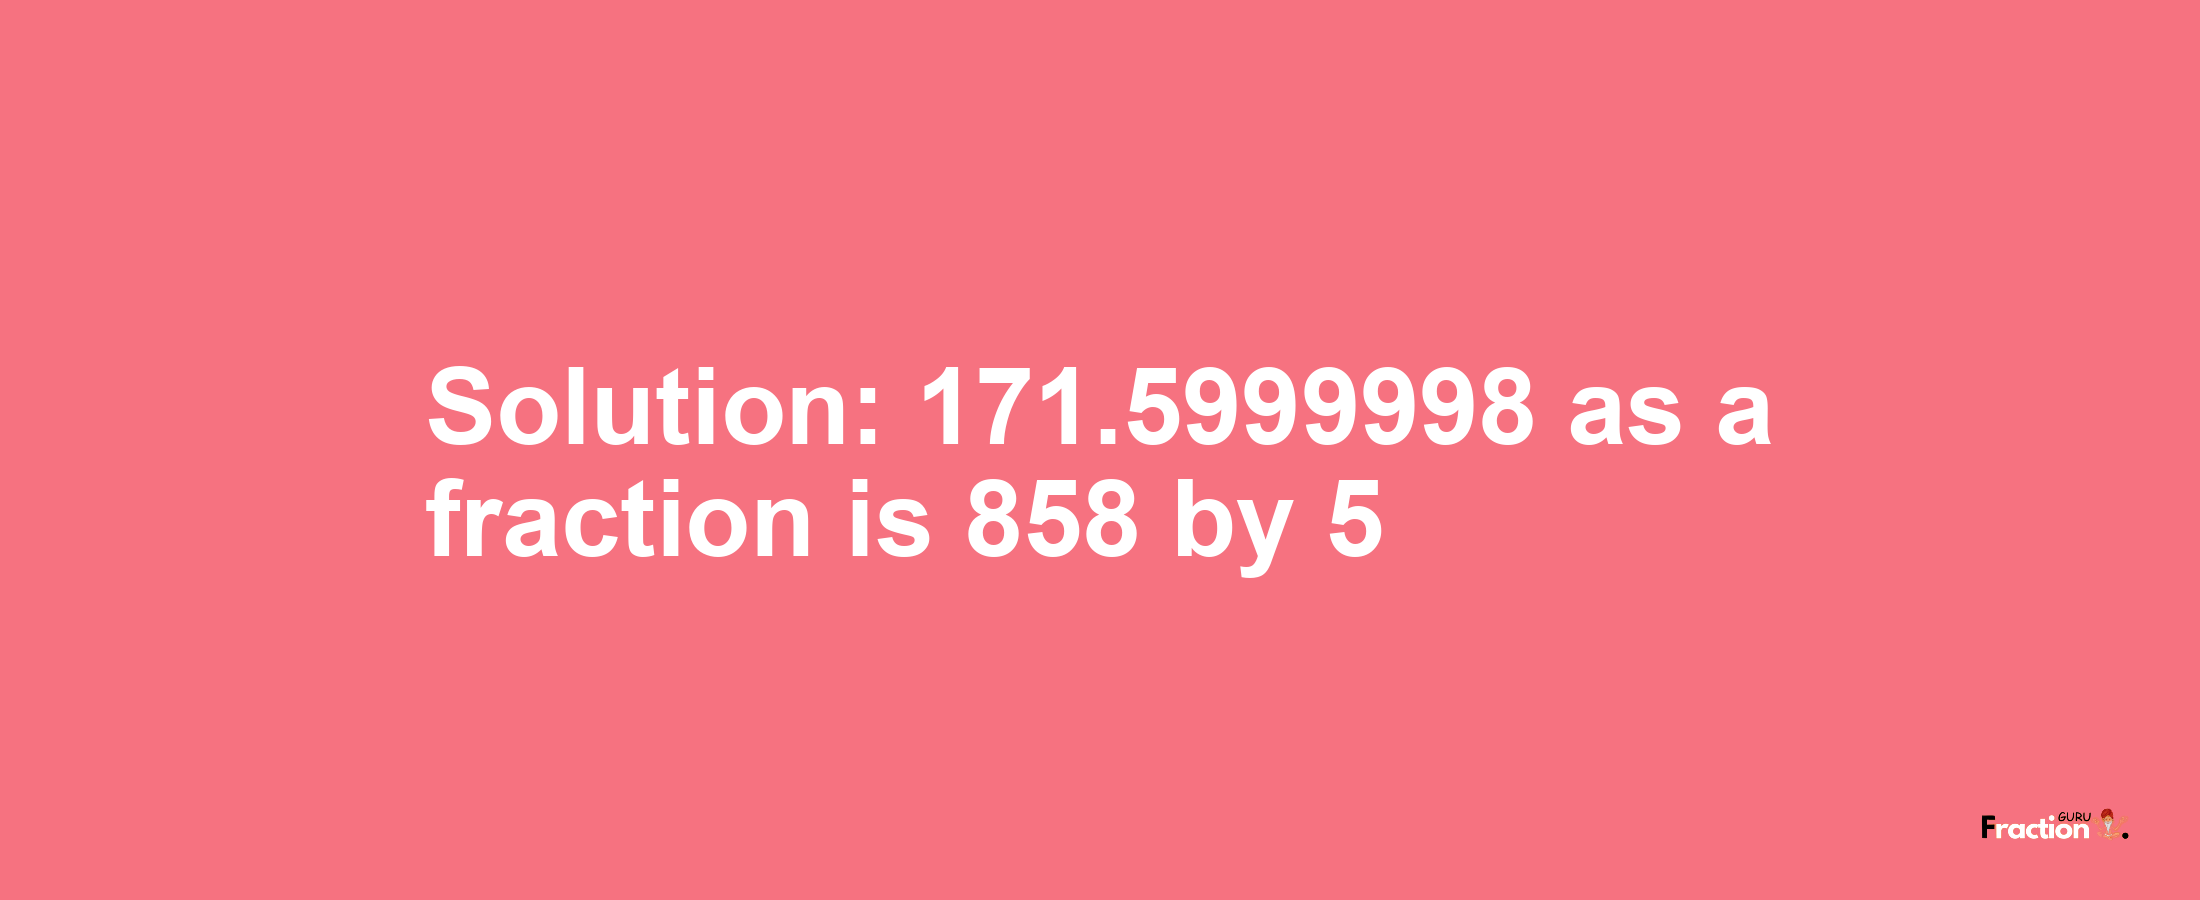 Solution:171.5999998 as a fraction is 858/5